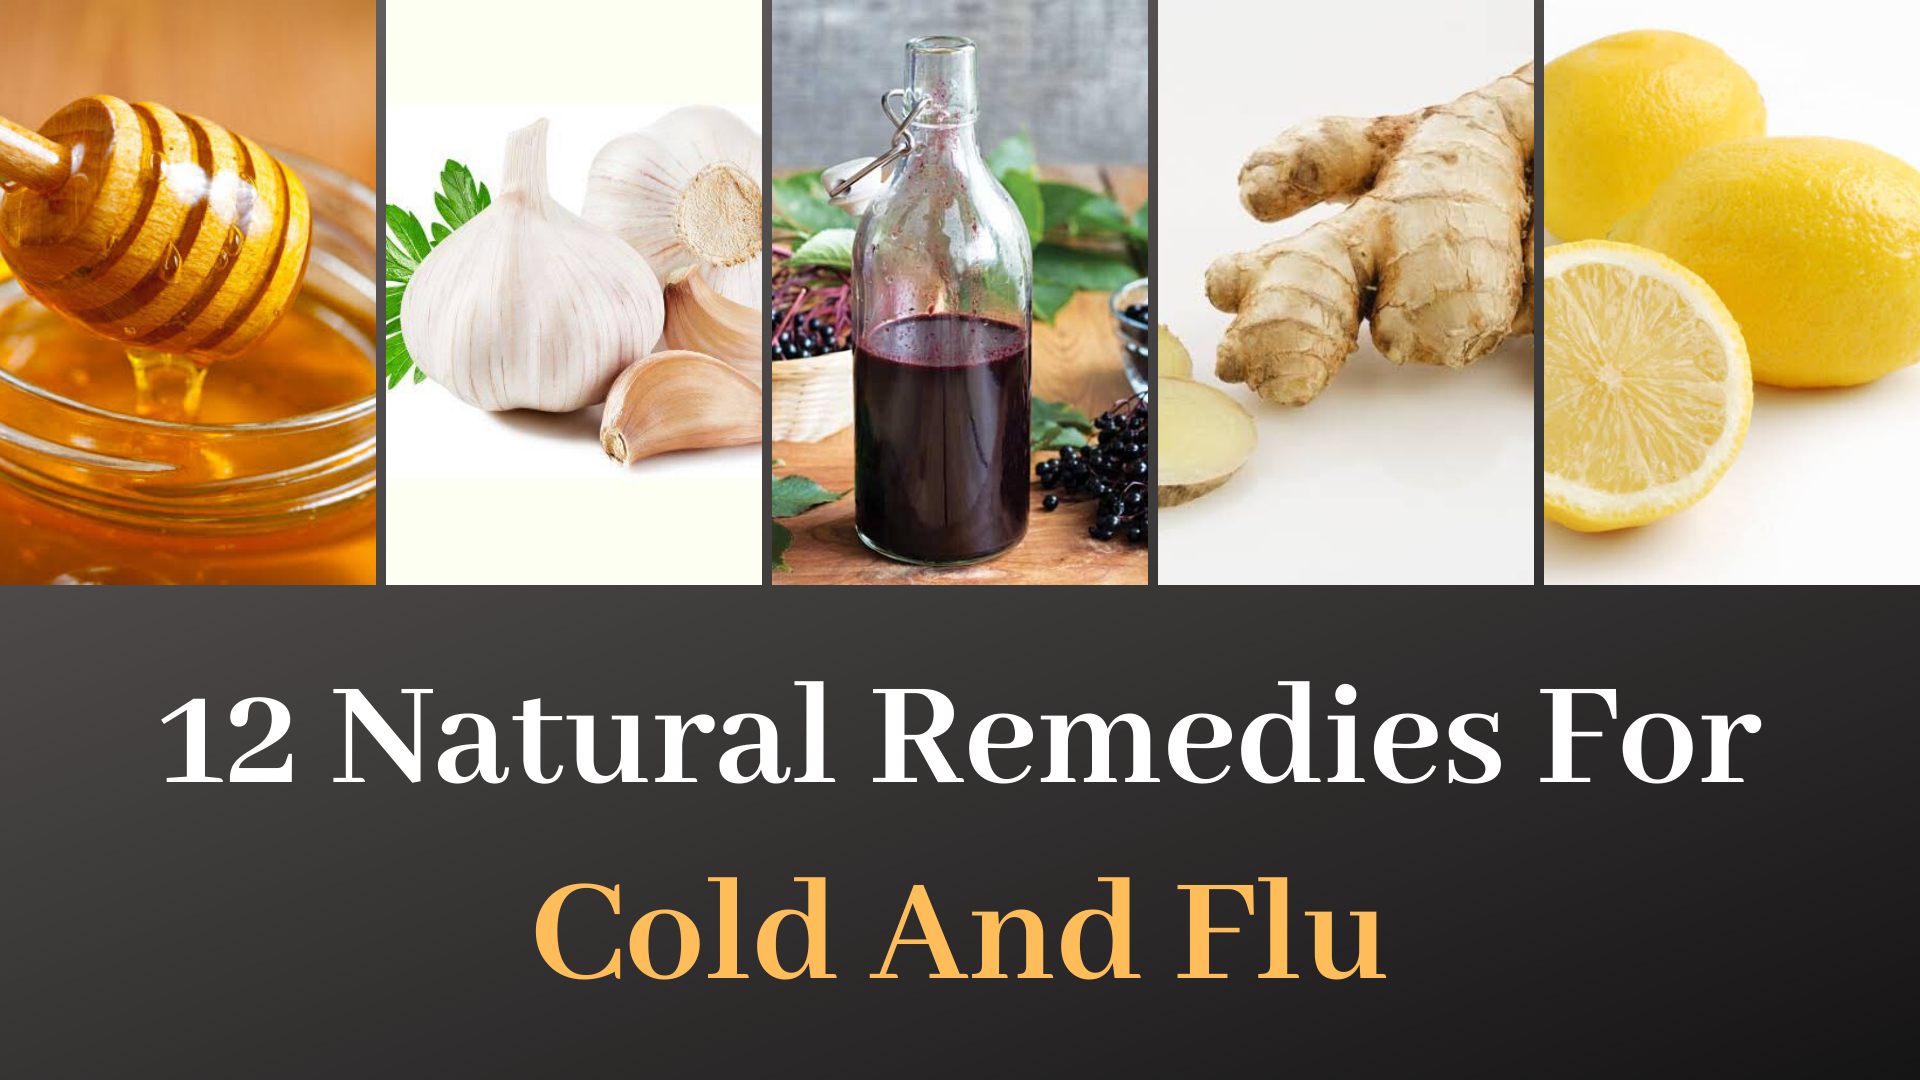 12 Natural Remedies For Cold And Flu.